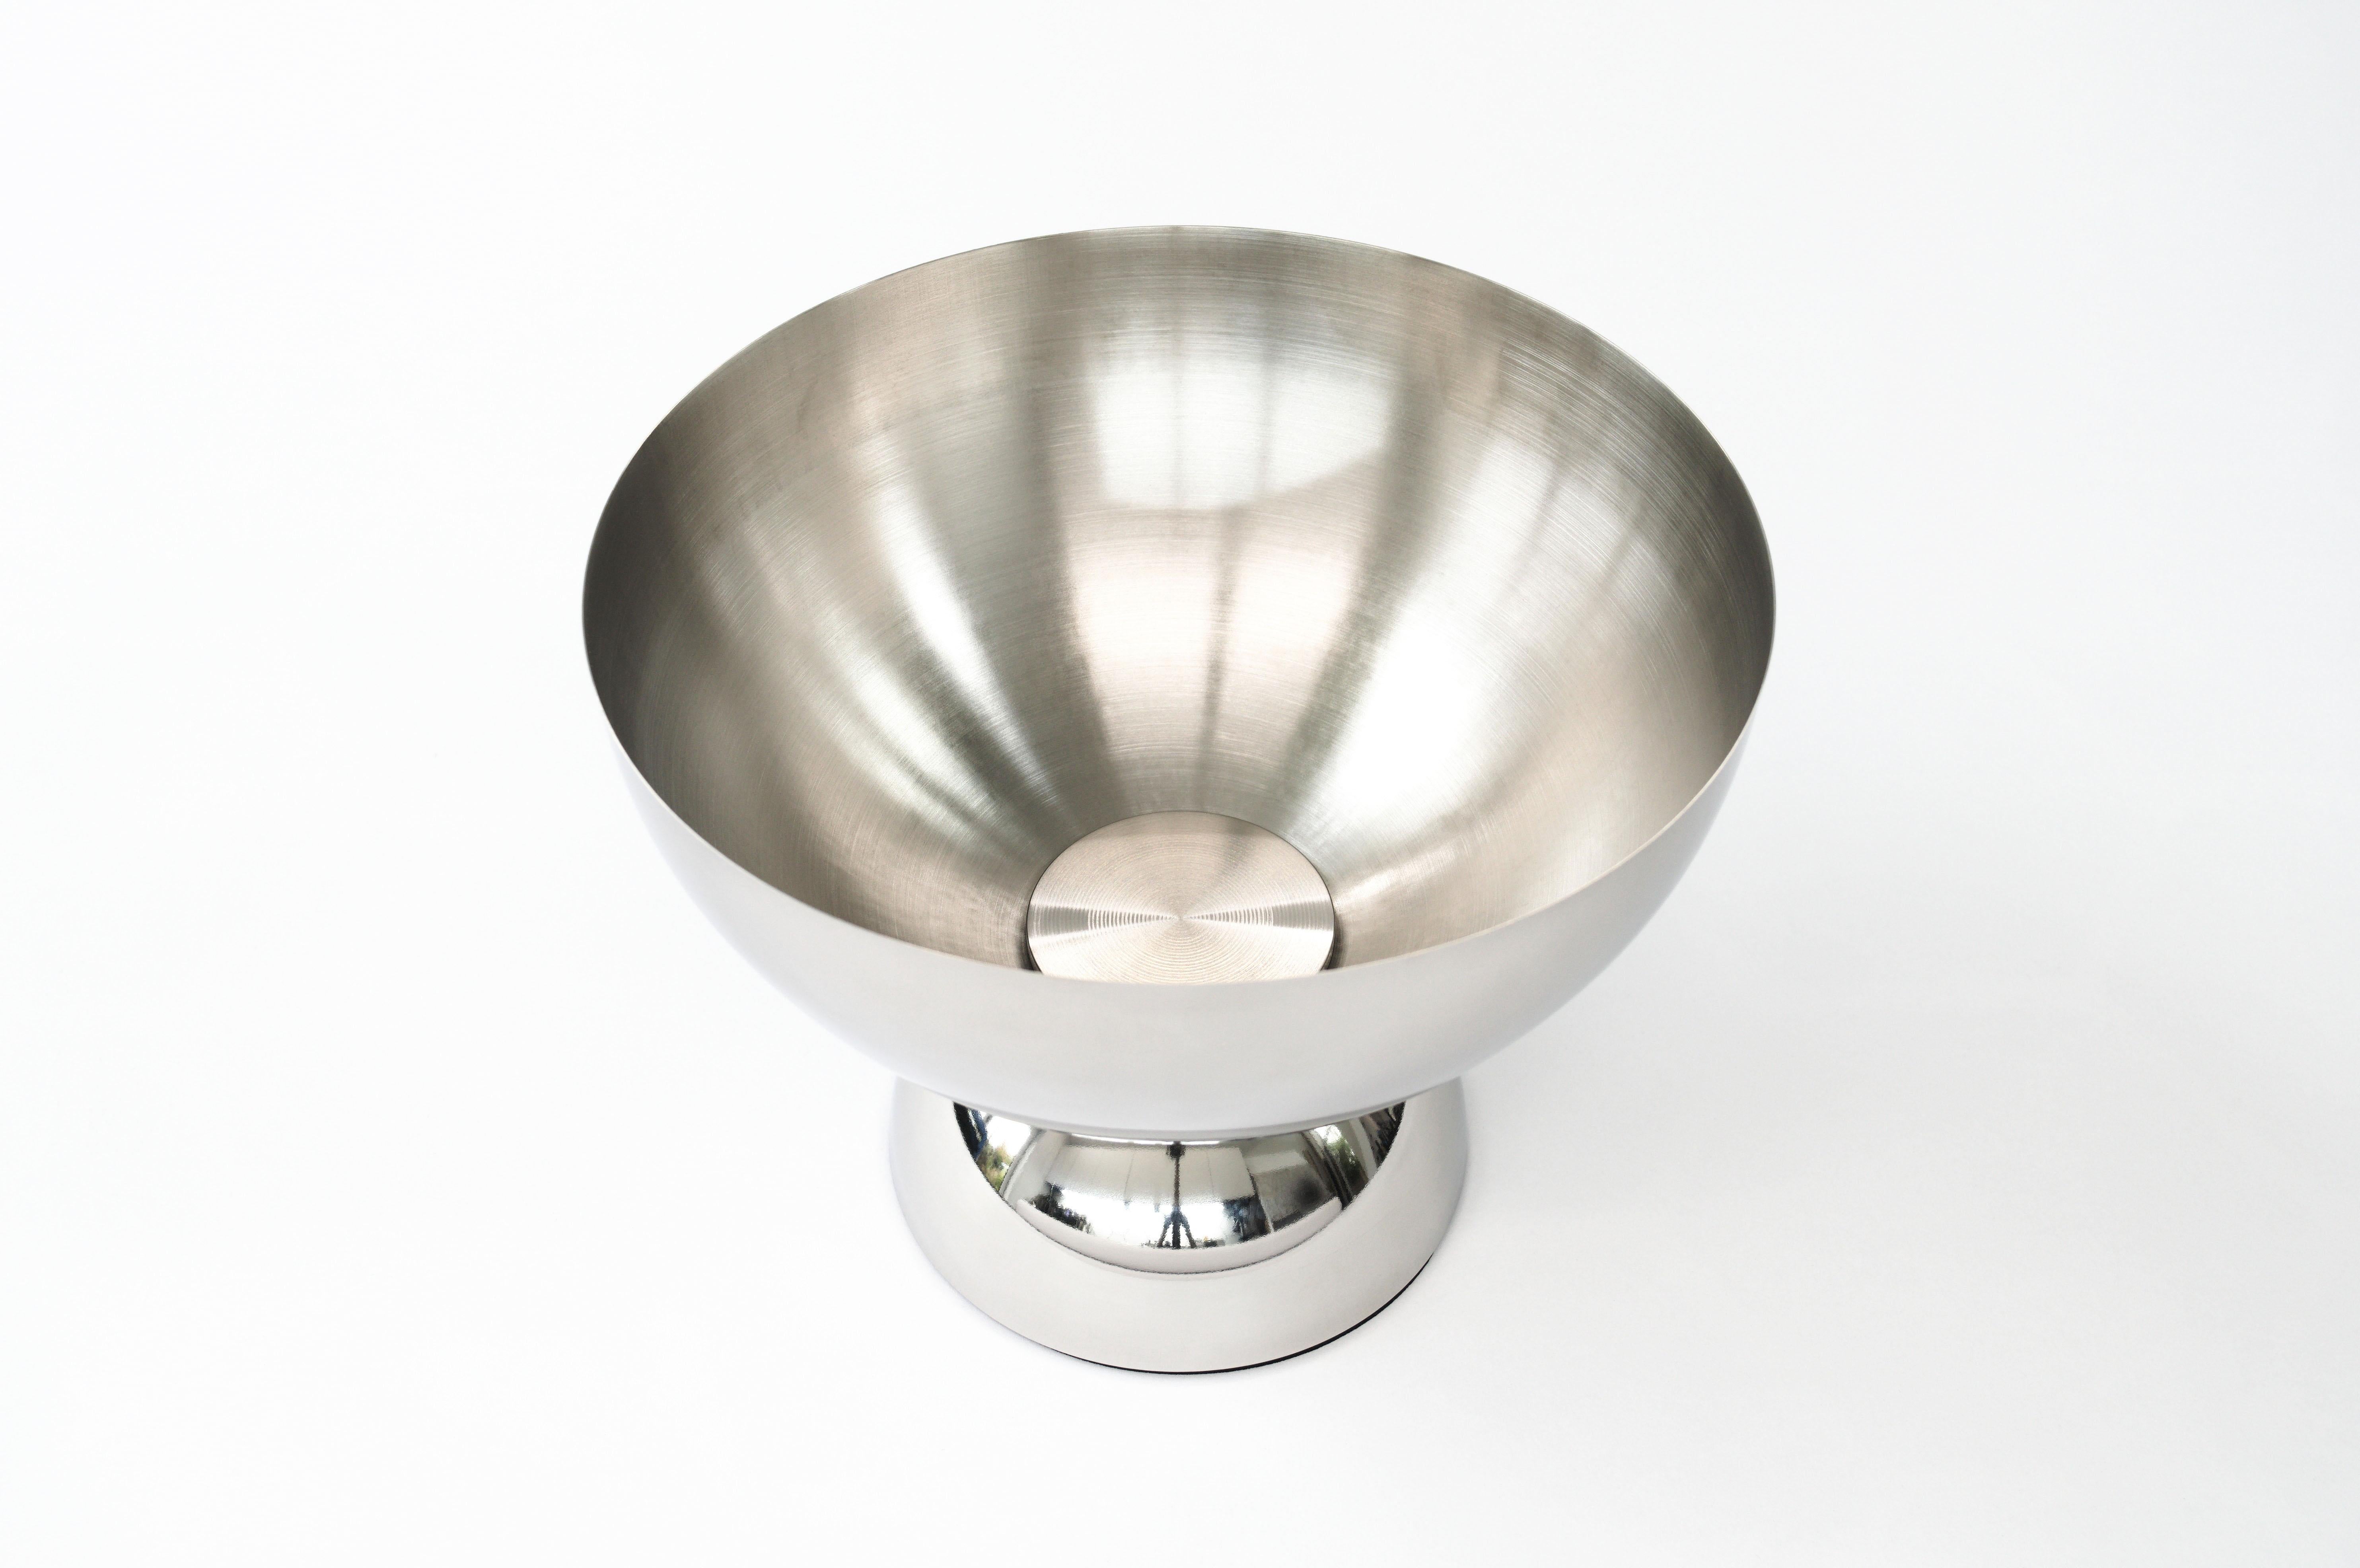 A futuristic bowl design made from polished stainless steel hemispheres, featuring a bushed finish on the inside and a wide diameter for use as a fruit bowl or decorative displays.

The bowl shares the same style with the Artemis Table and